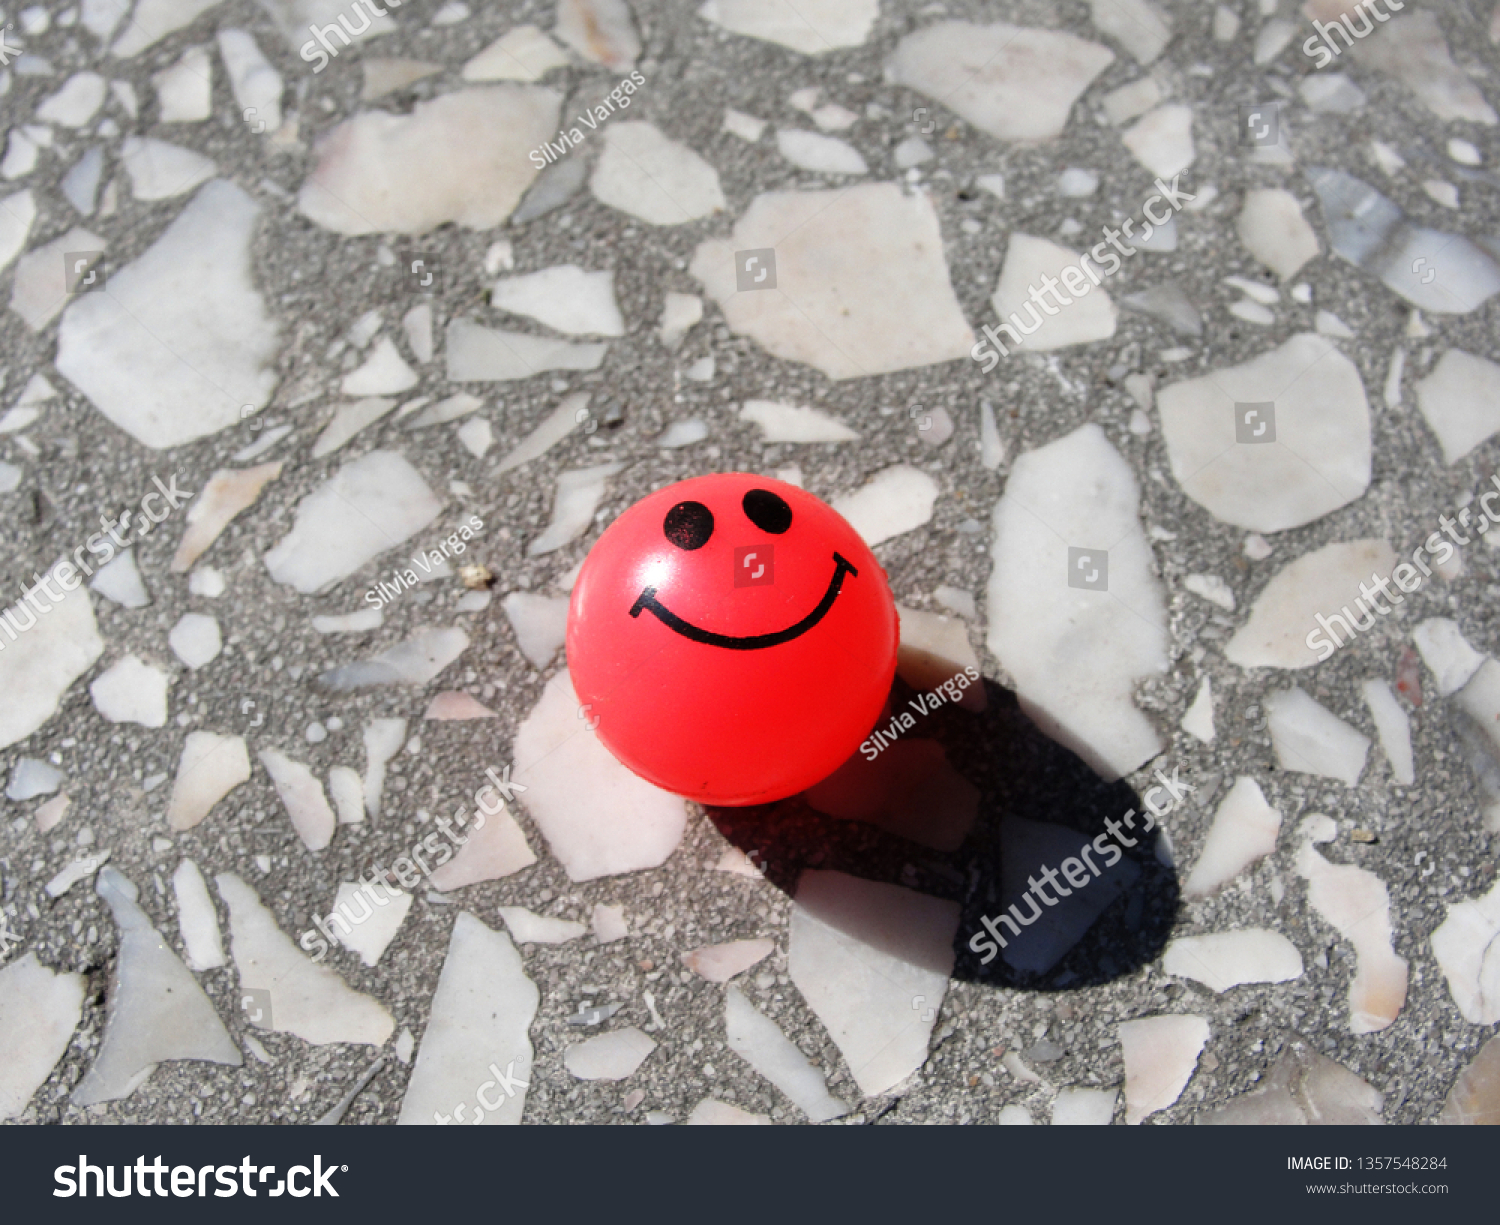 Pink rubber ball with smiley face                                #1357548284